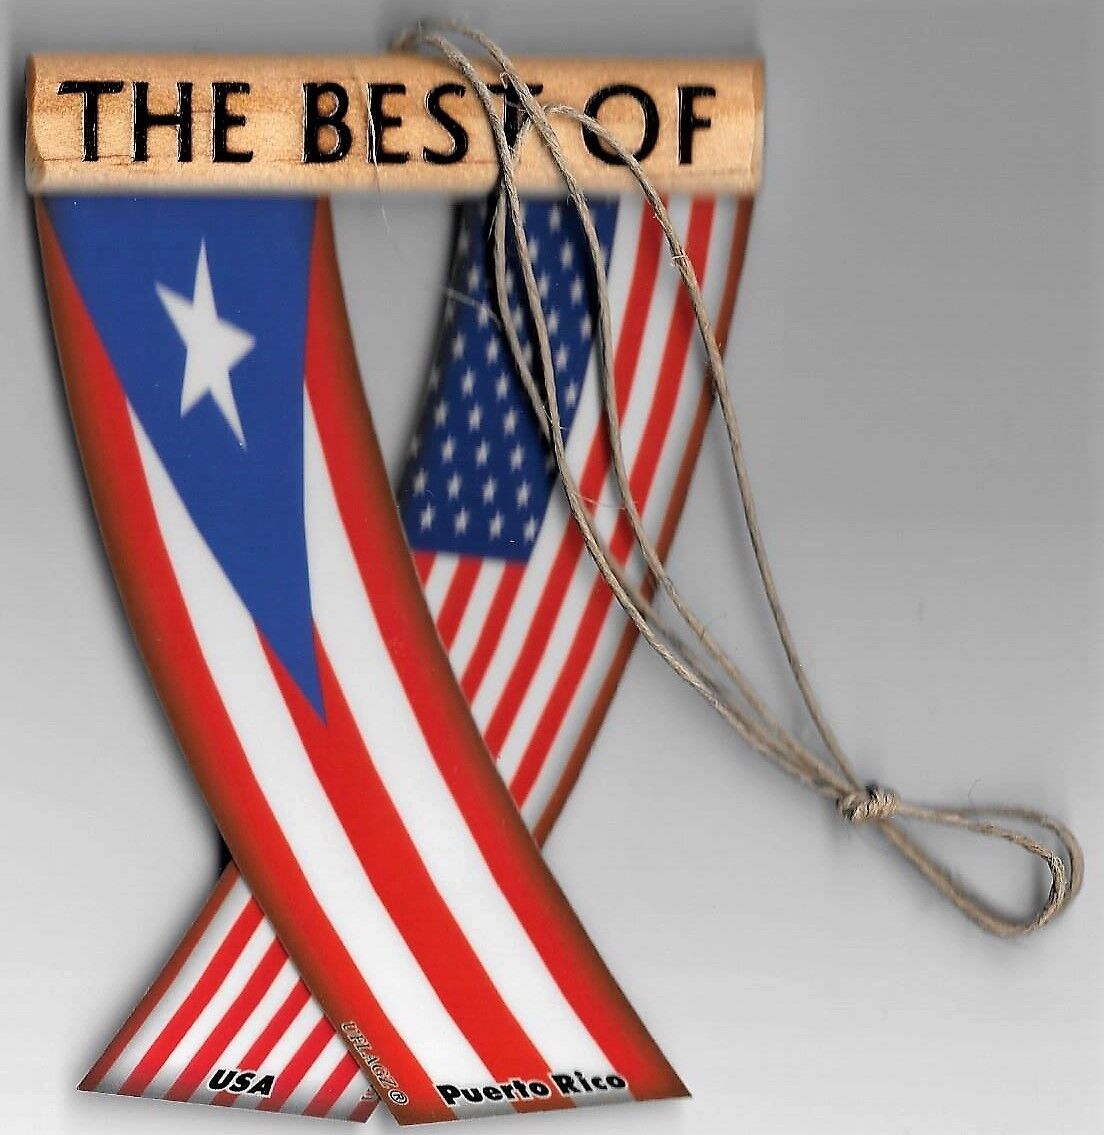 Rear view mirror car flags Puerto Rico and USA unity flagz for inside the car